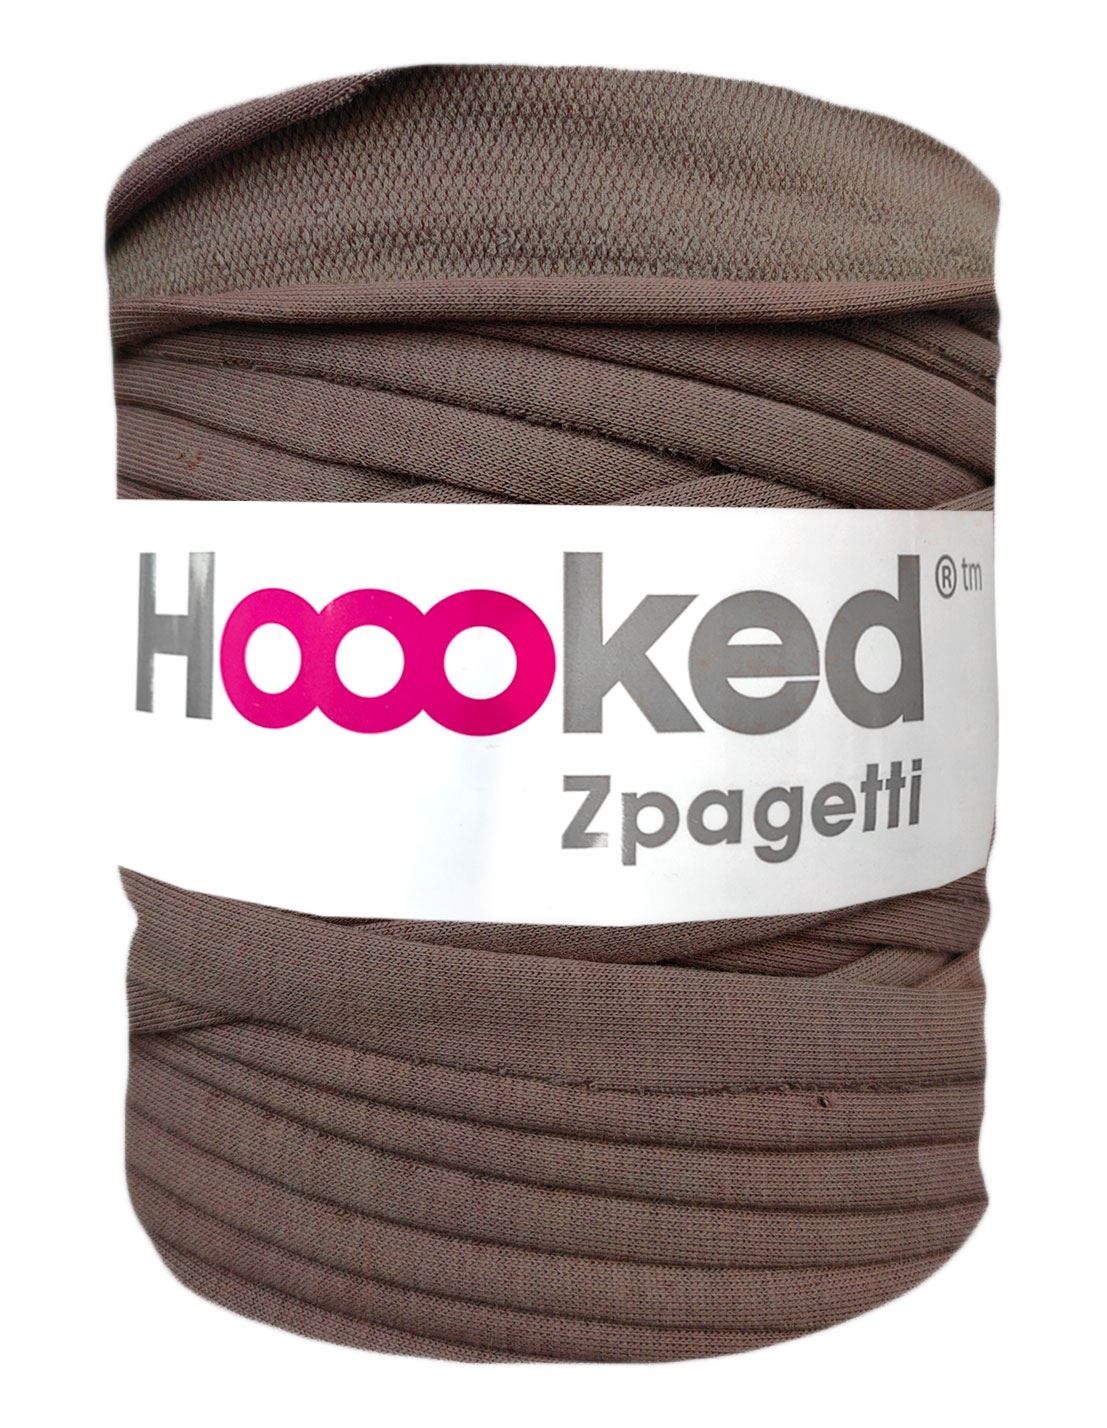 Medium taupe t-shirt yarn by Hoooked Zpagetti (100-120m)